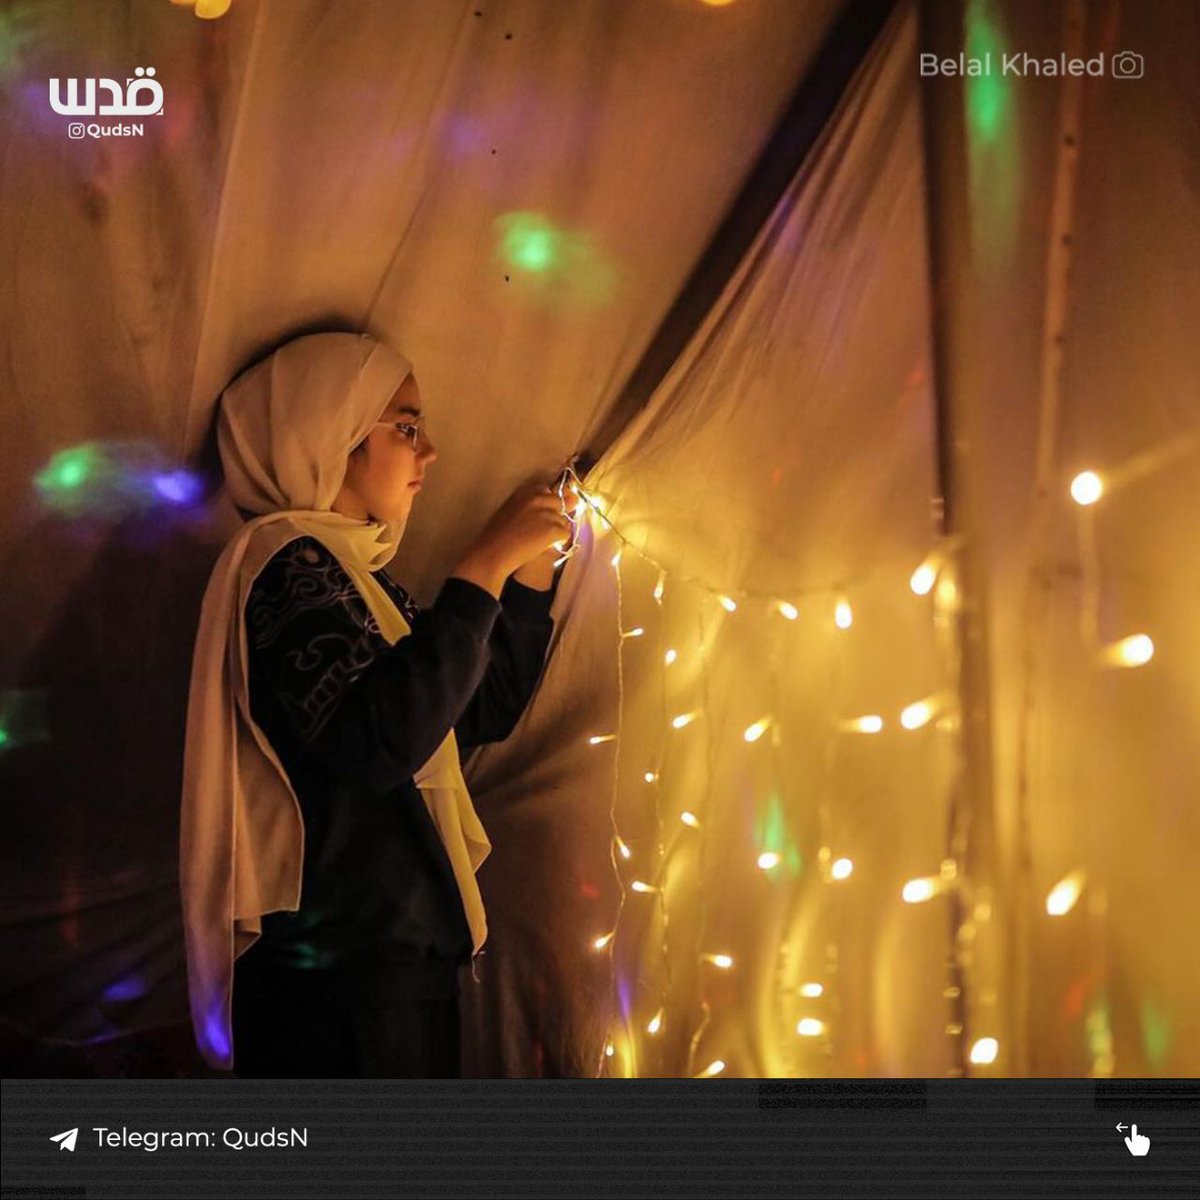 A displaced Palestinian family in Rafah decorates its tent with lanterns and decorations in anticipation of Ramadan to bring joy for the children and mitigate the effects of war.